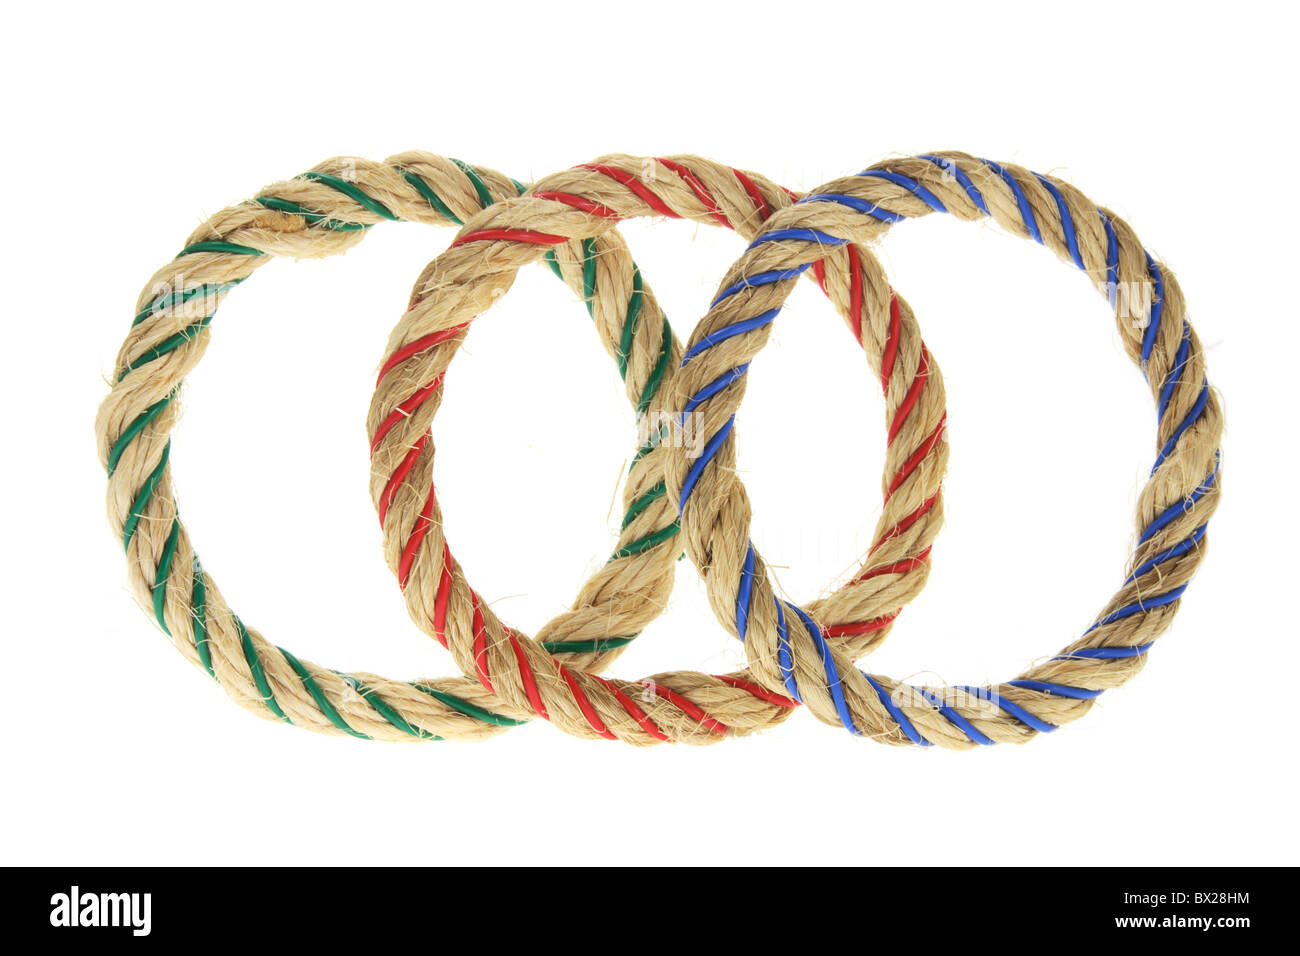 Ring Toss Game Ropes Stock Photo